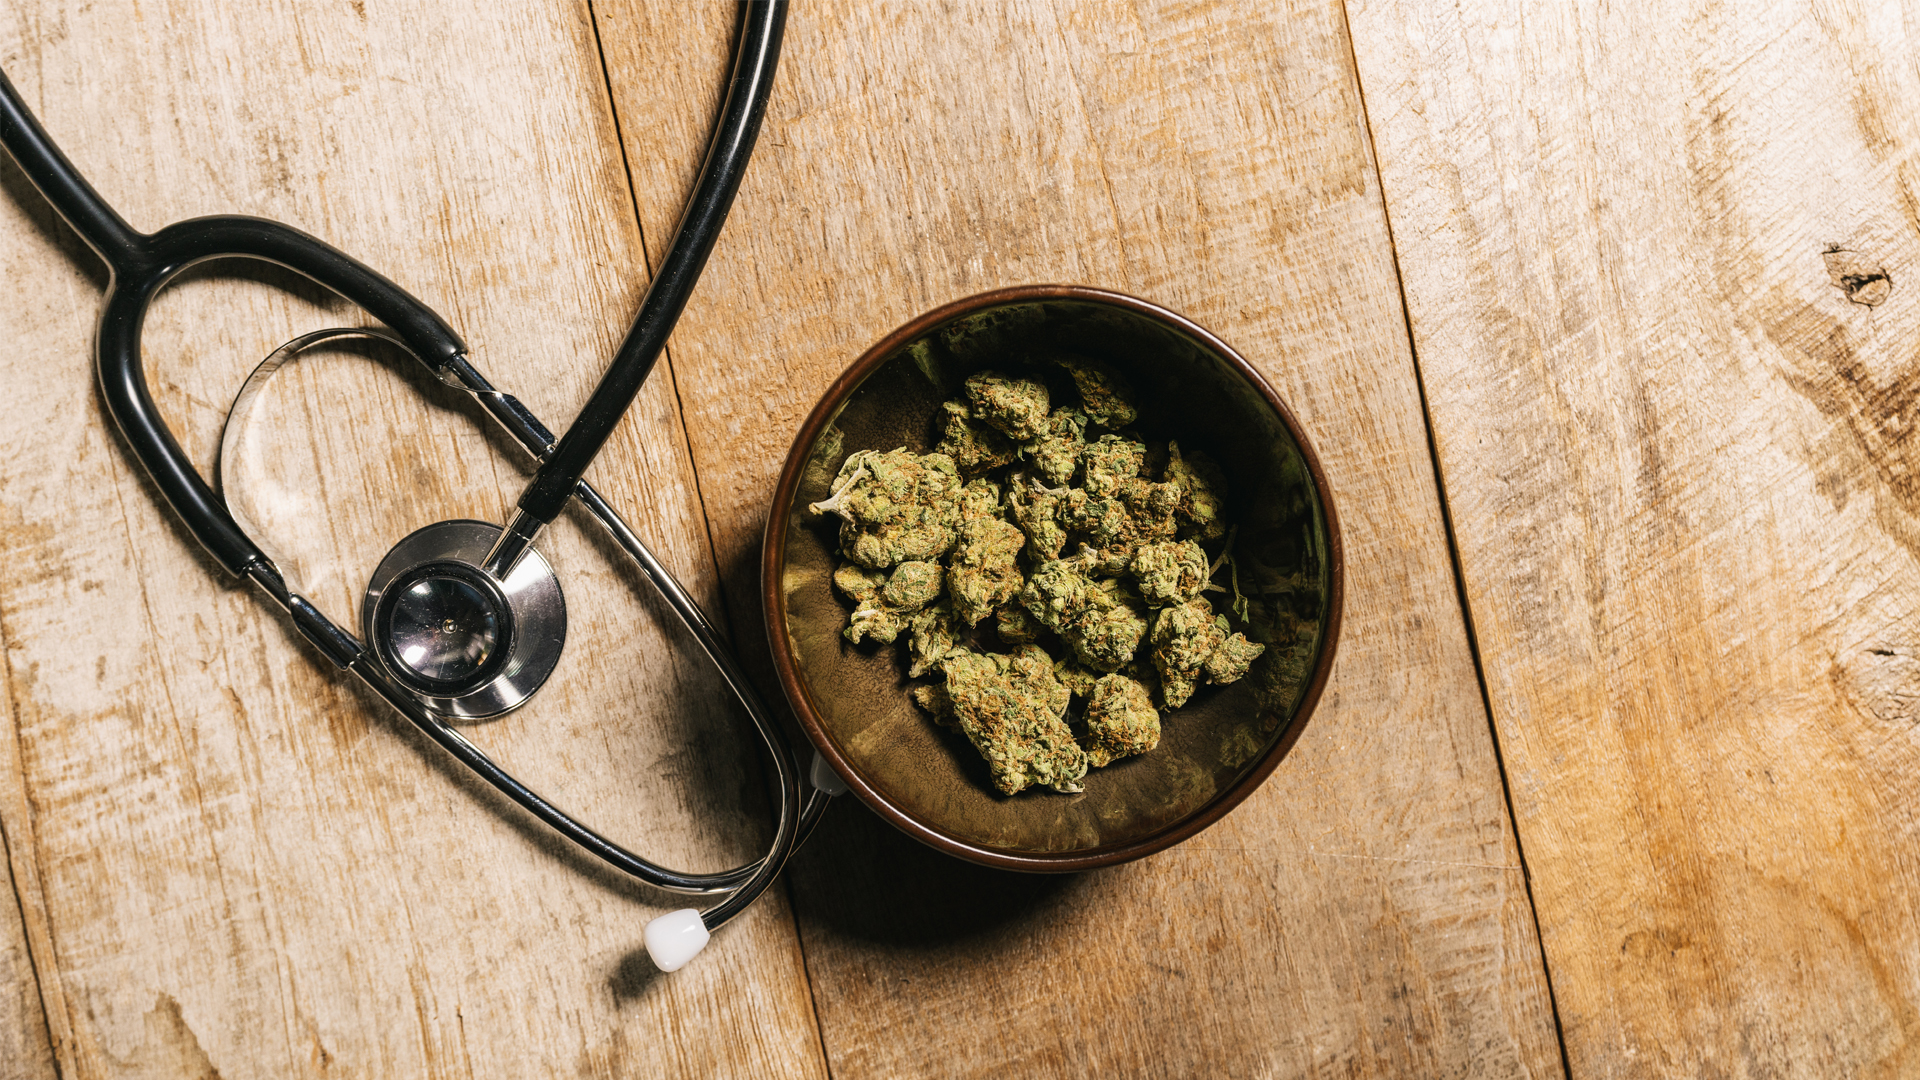 NHS urged to listen to new guidance on prescribing medical cannabis